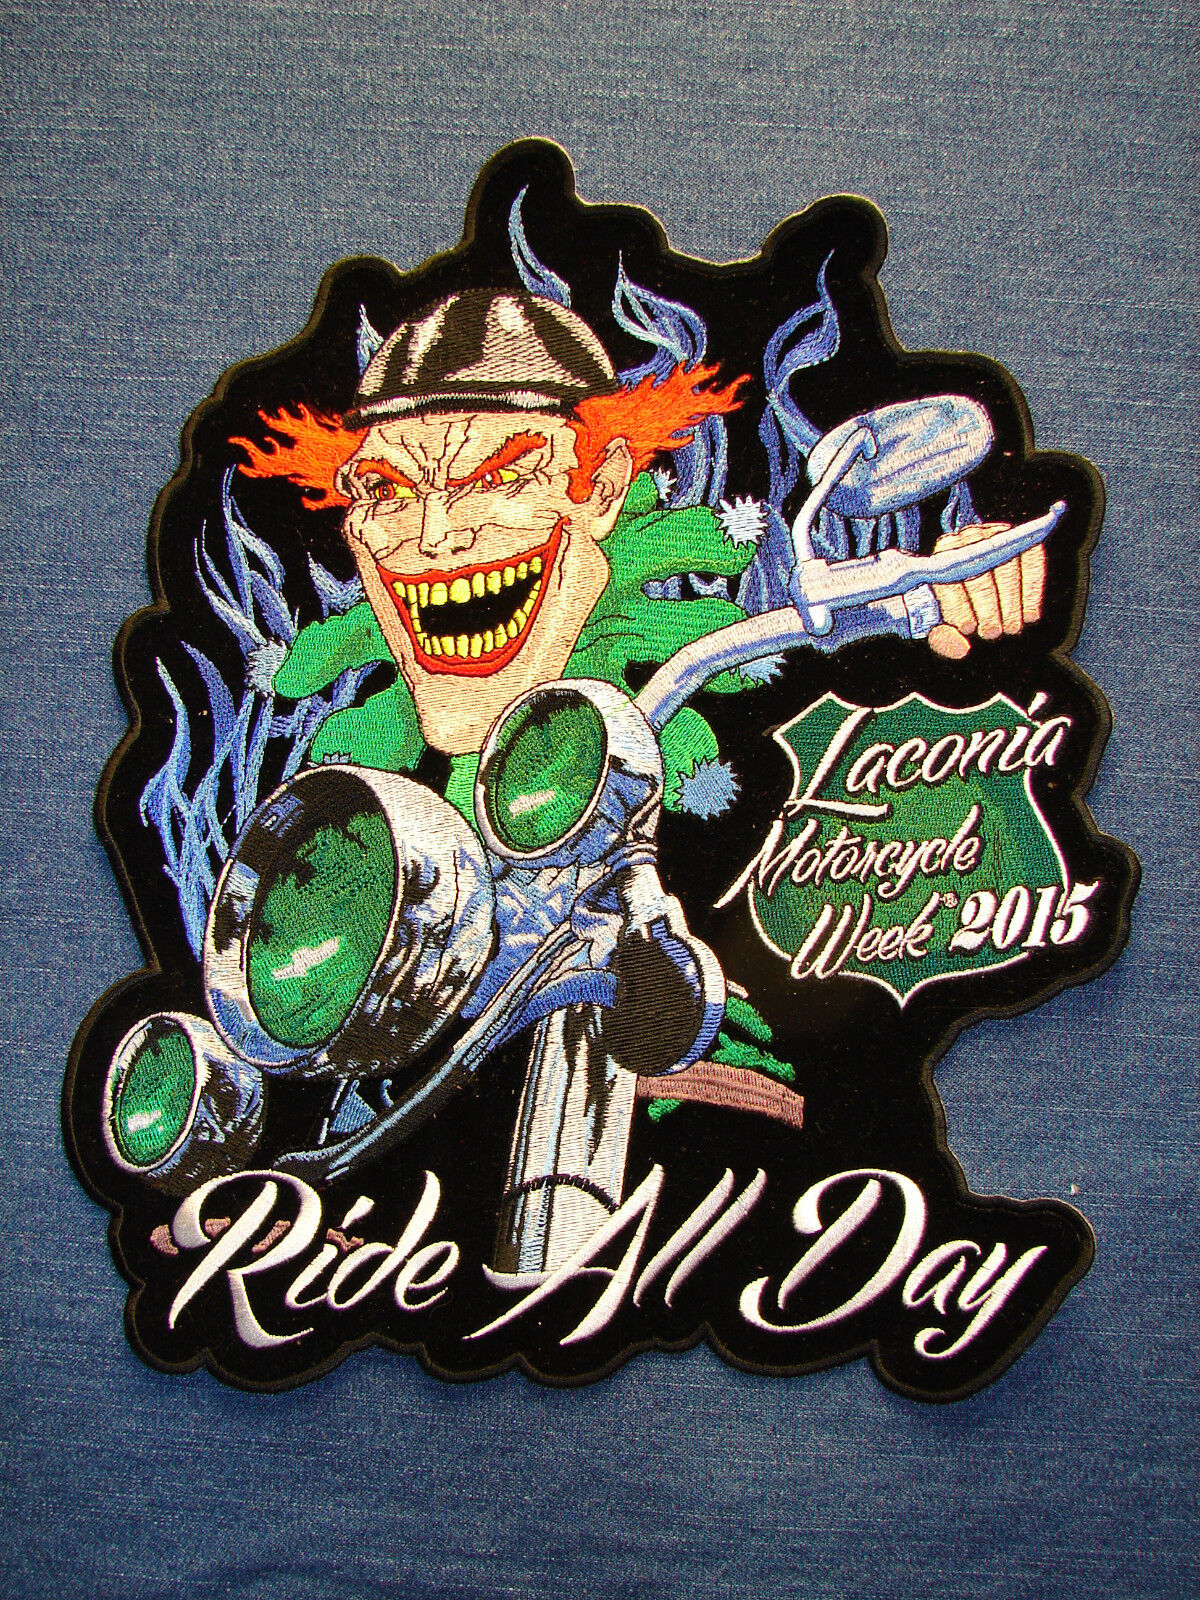 Huge Laconia Motorcyle Week 2015 Patch Harley  RIDE ALL DAY Applique Vest ralley